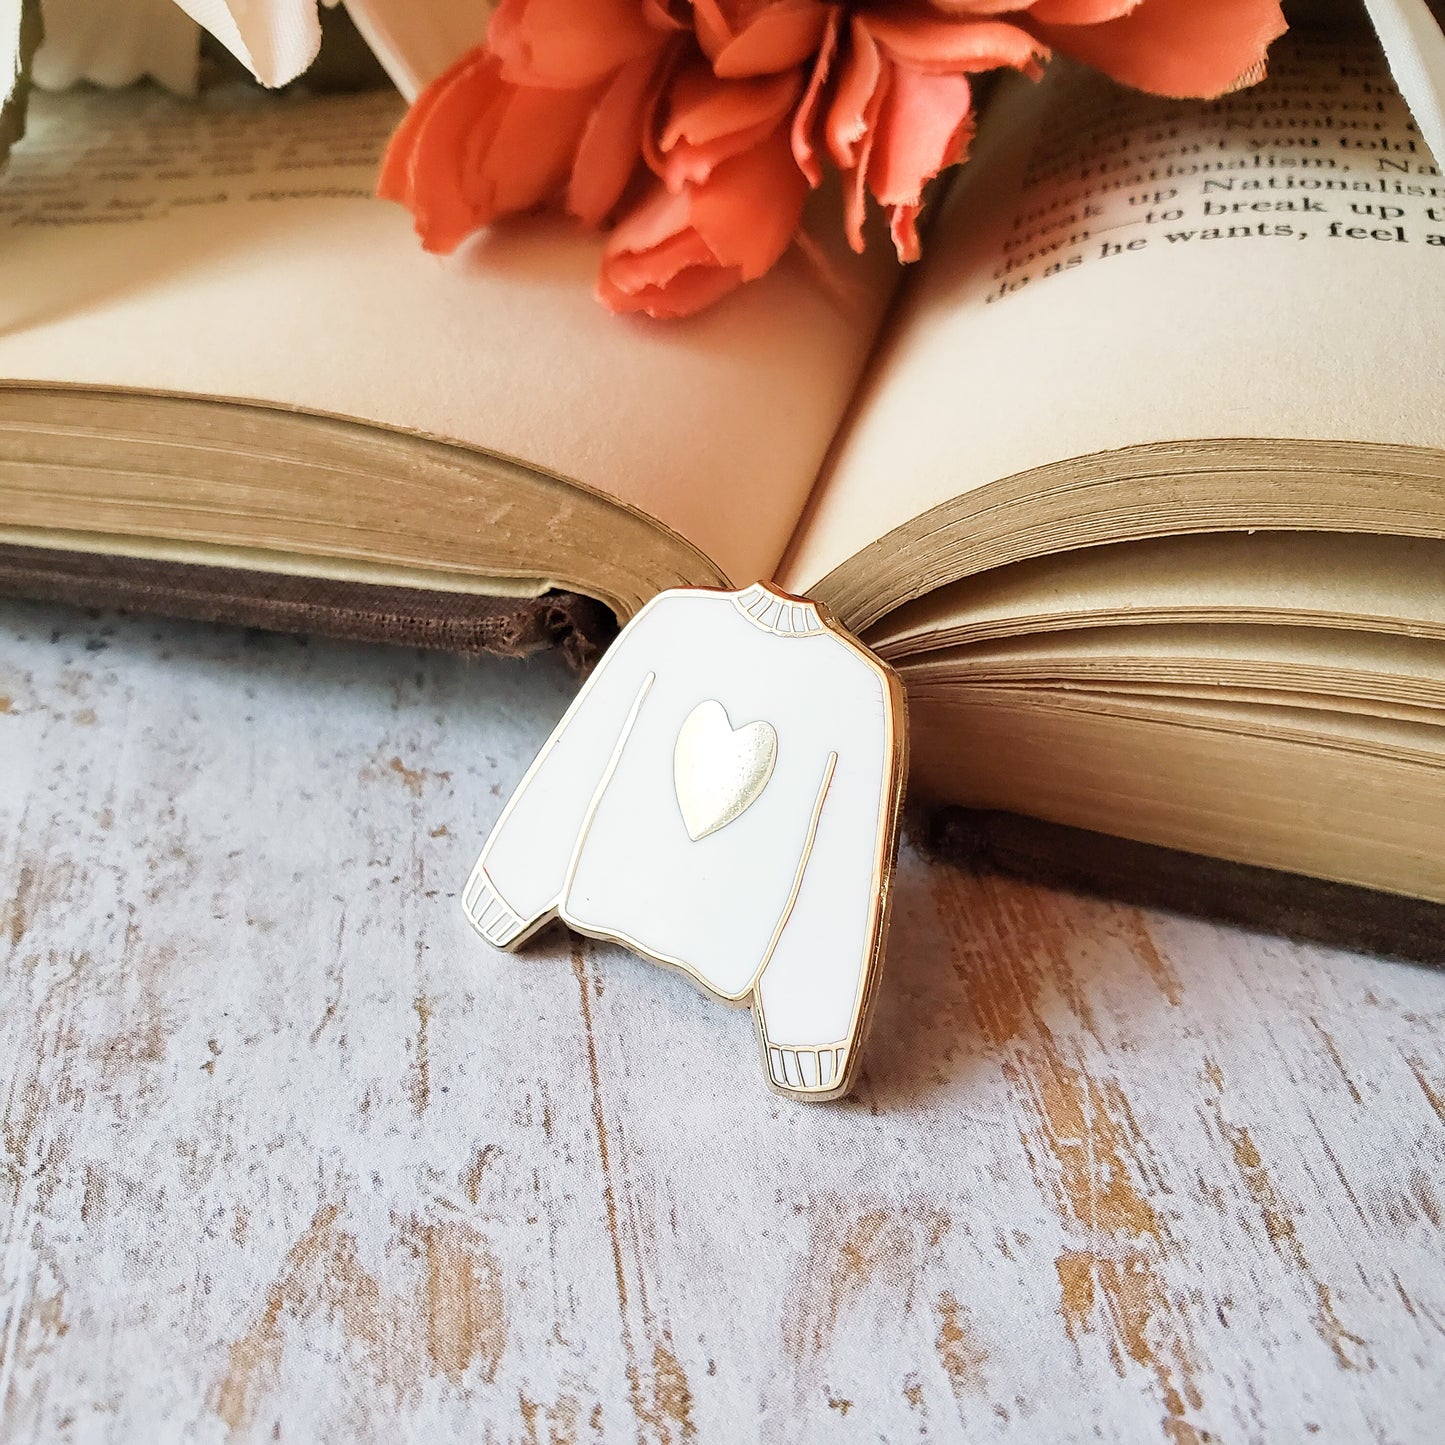 White hand stamped heart sweater enamel pin with a book